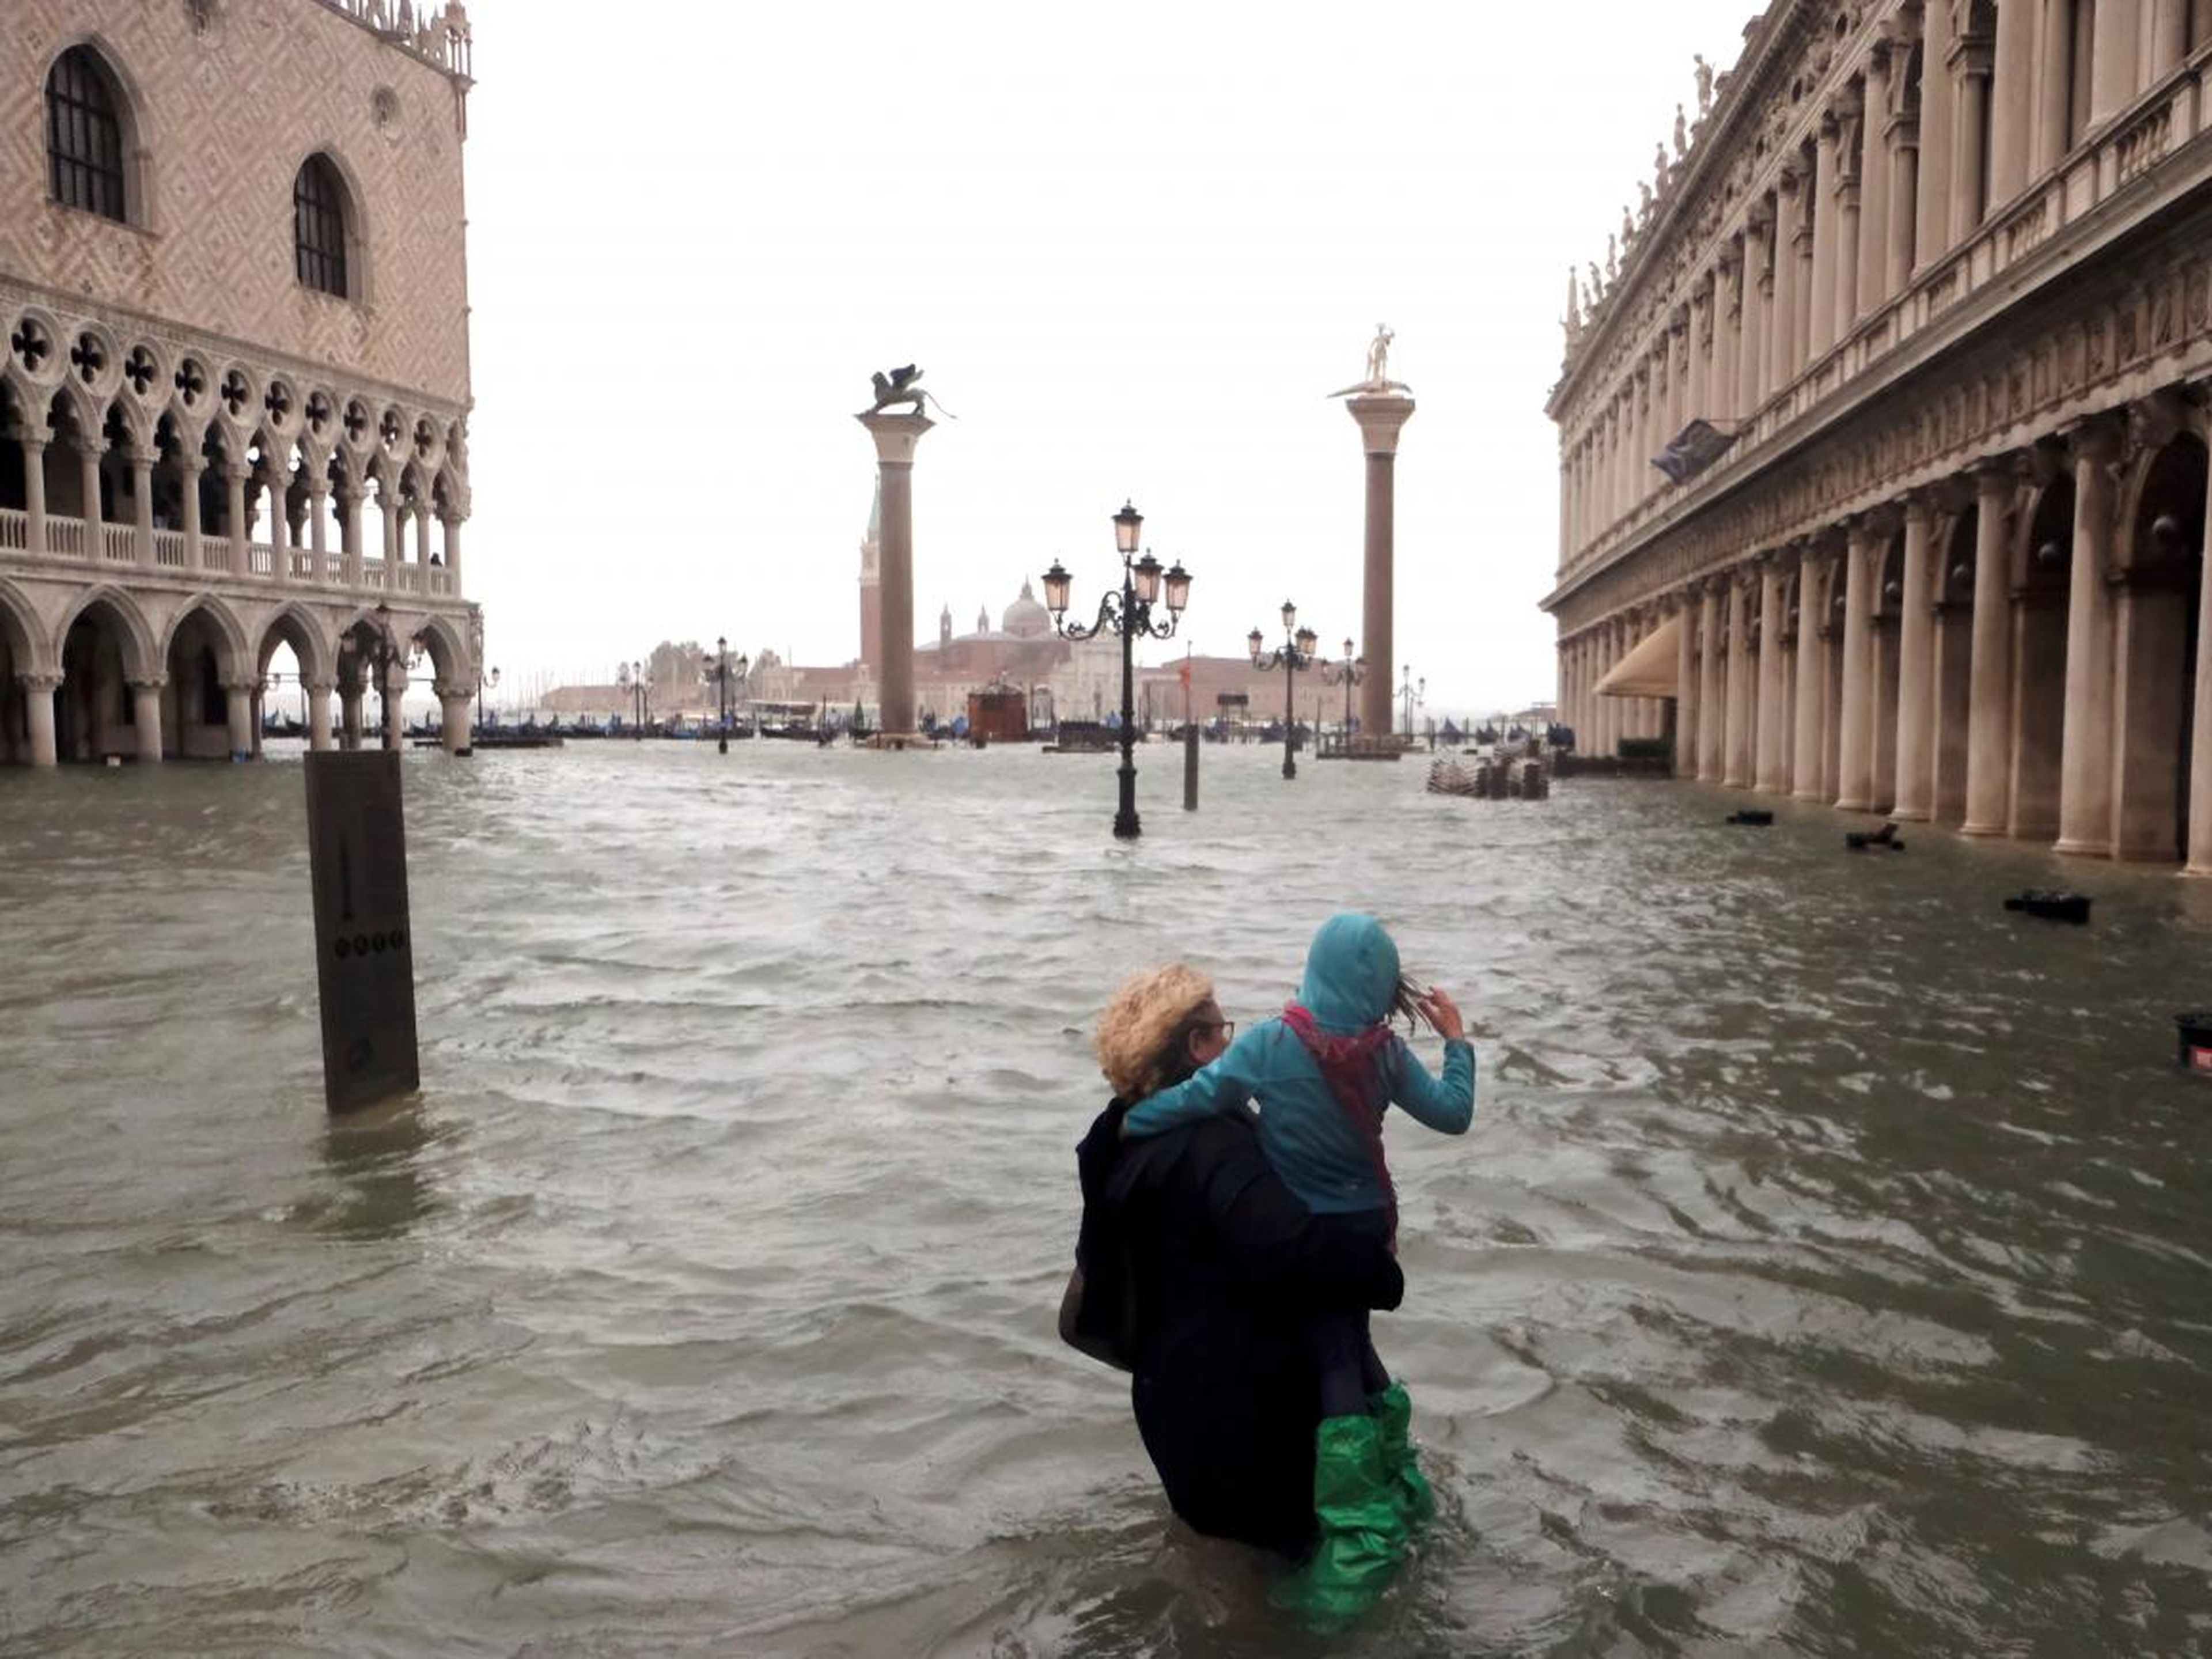 In addition to the flood of tourists, Venice is also plagued by literal floods.